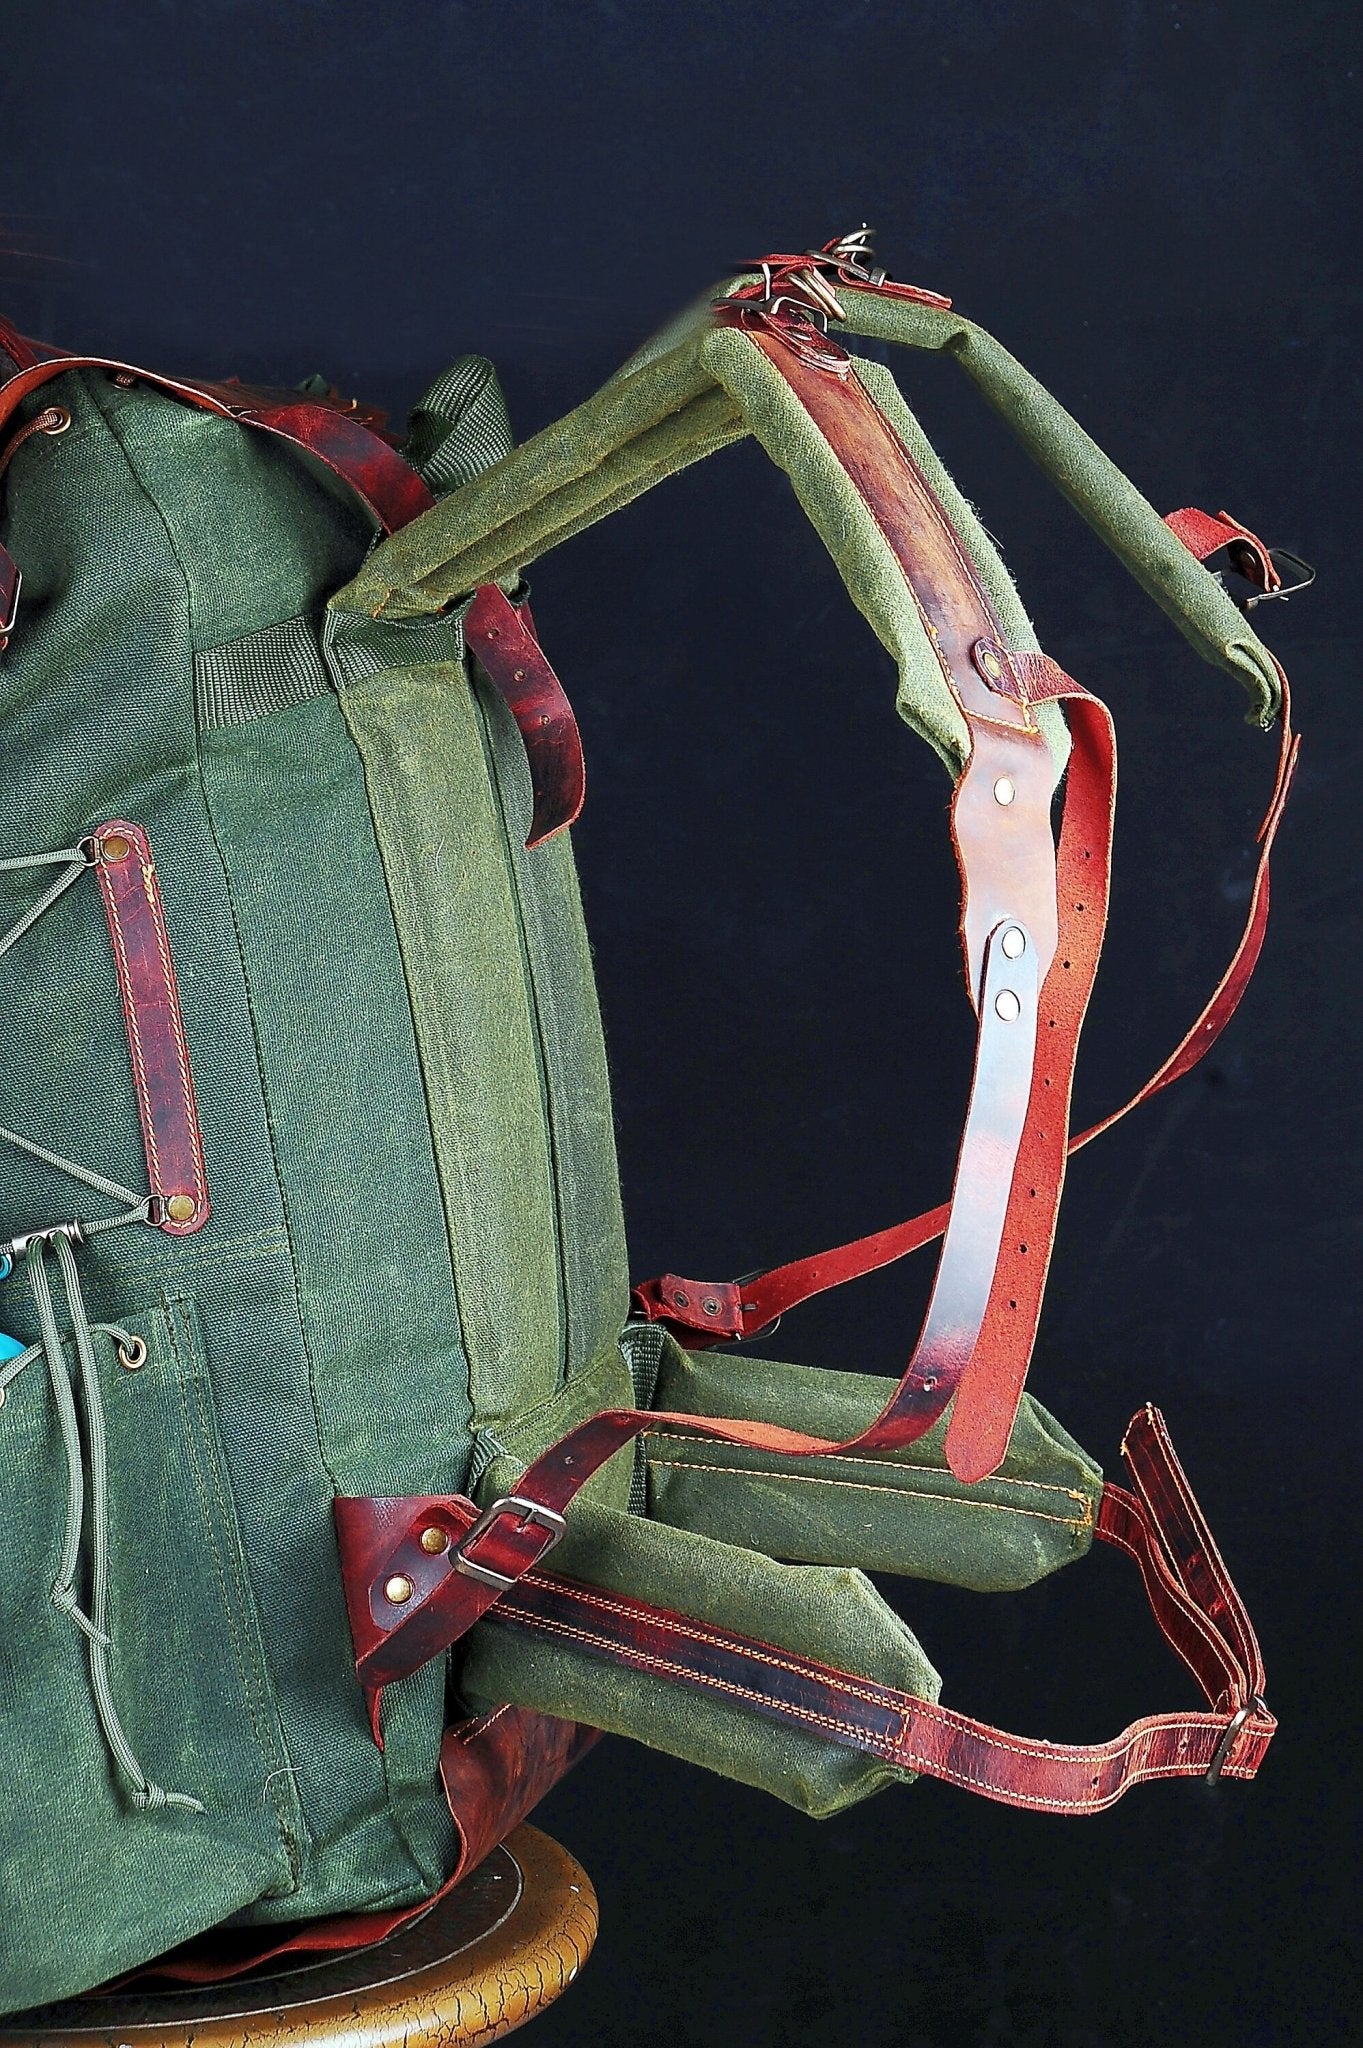 Green Bestseller | Leather Backpack | Waxed Canvas Bag | Travel | Bushcraft | Camping | Green, Brown Options | 50 Liters | Personalization  99percenthandmade   